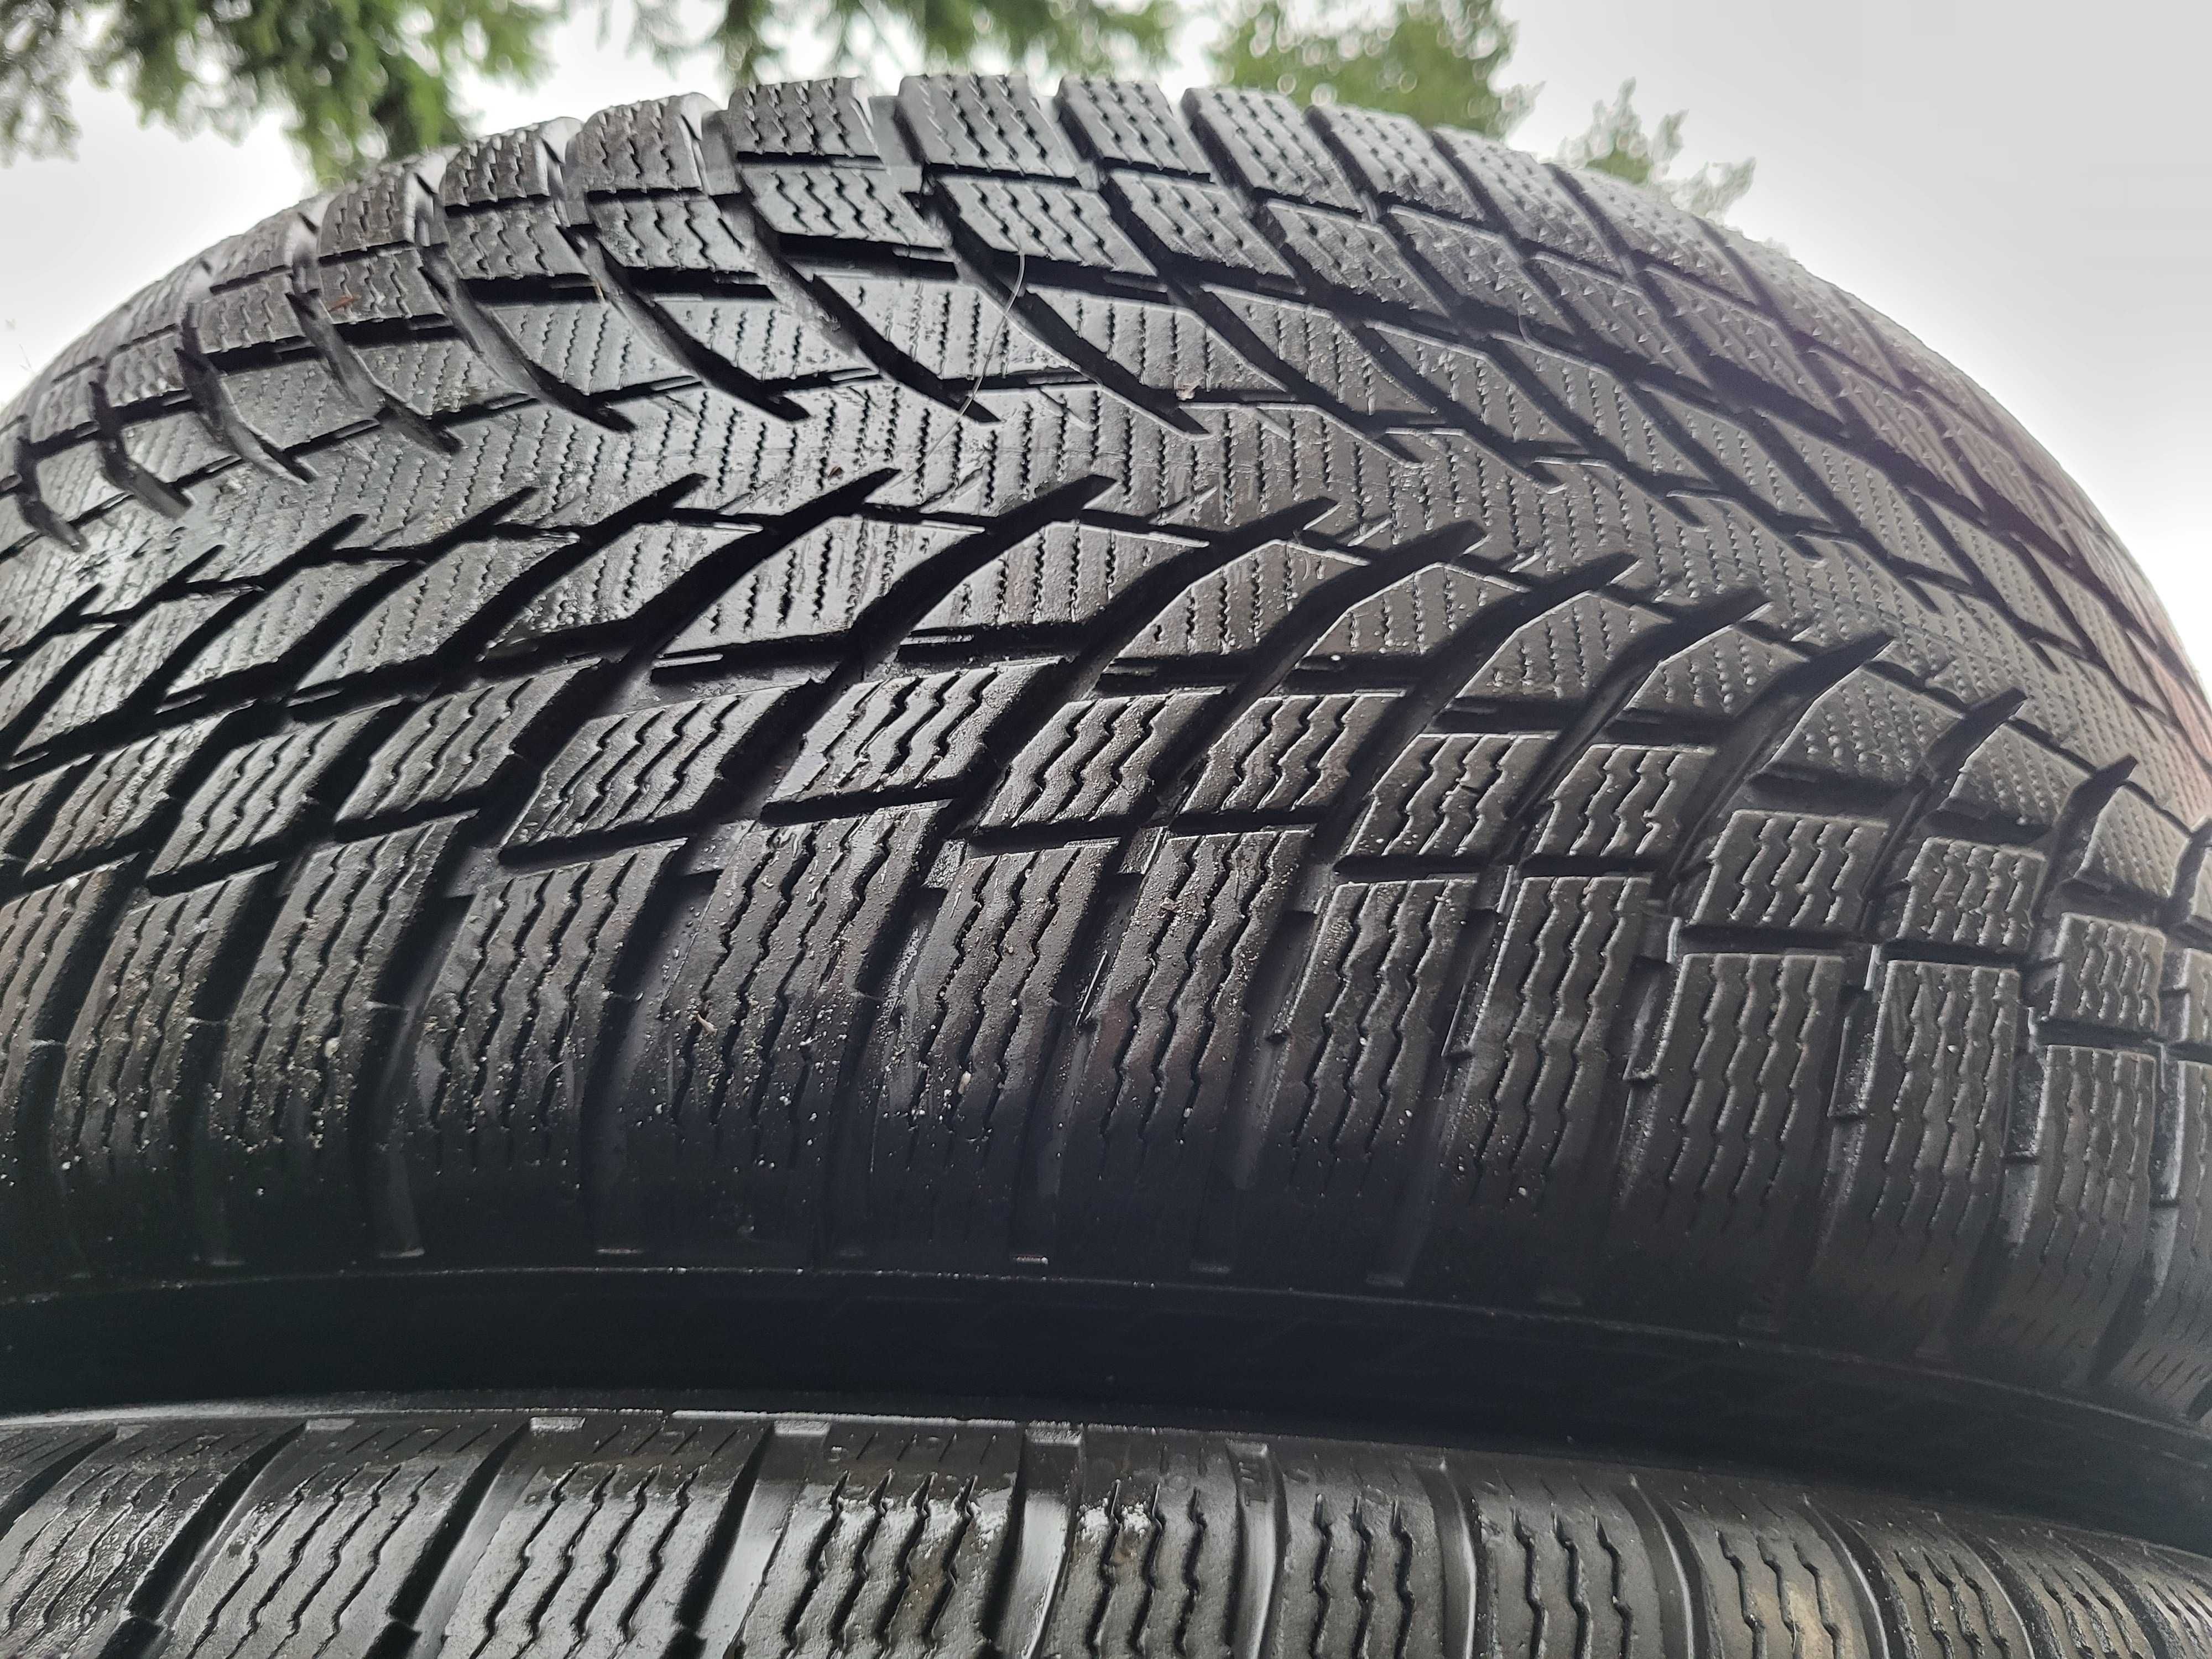 Komplet opon zimowych Nokian WR SnowProof P 245/45r19 102V XL 2021 r.